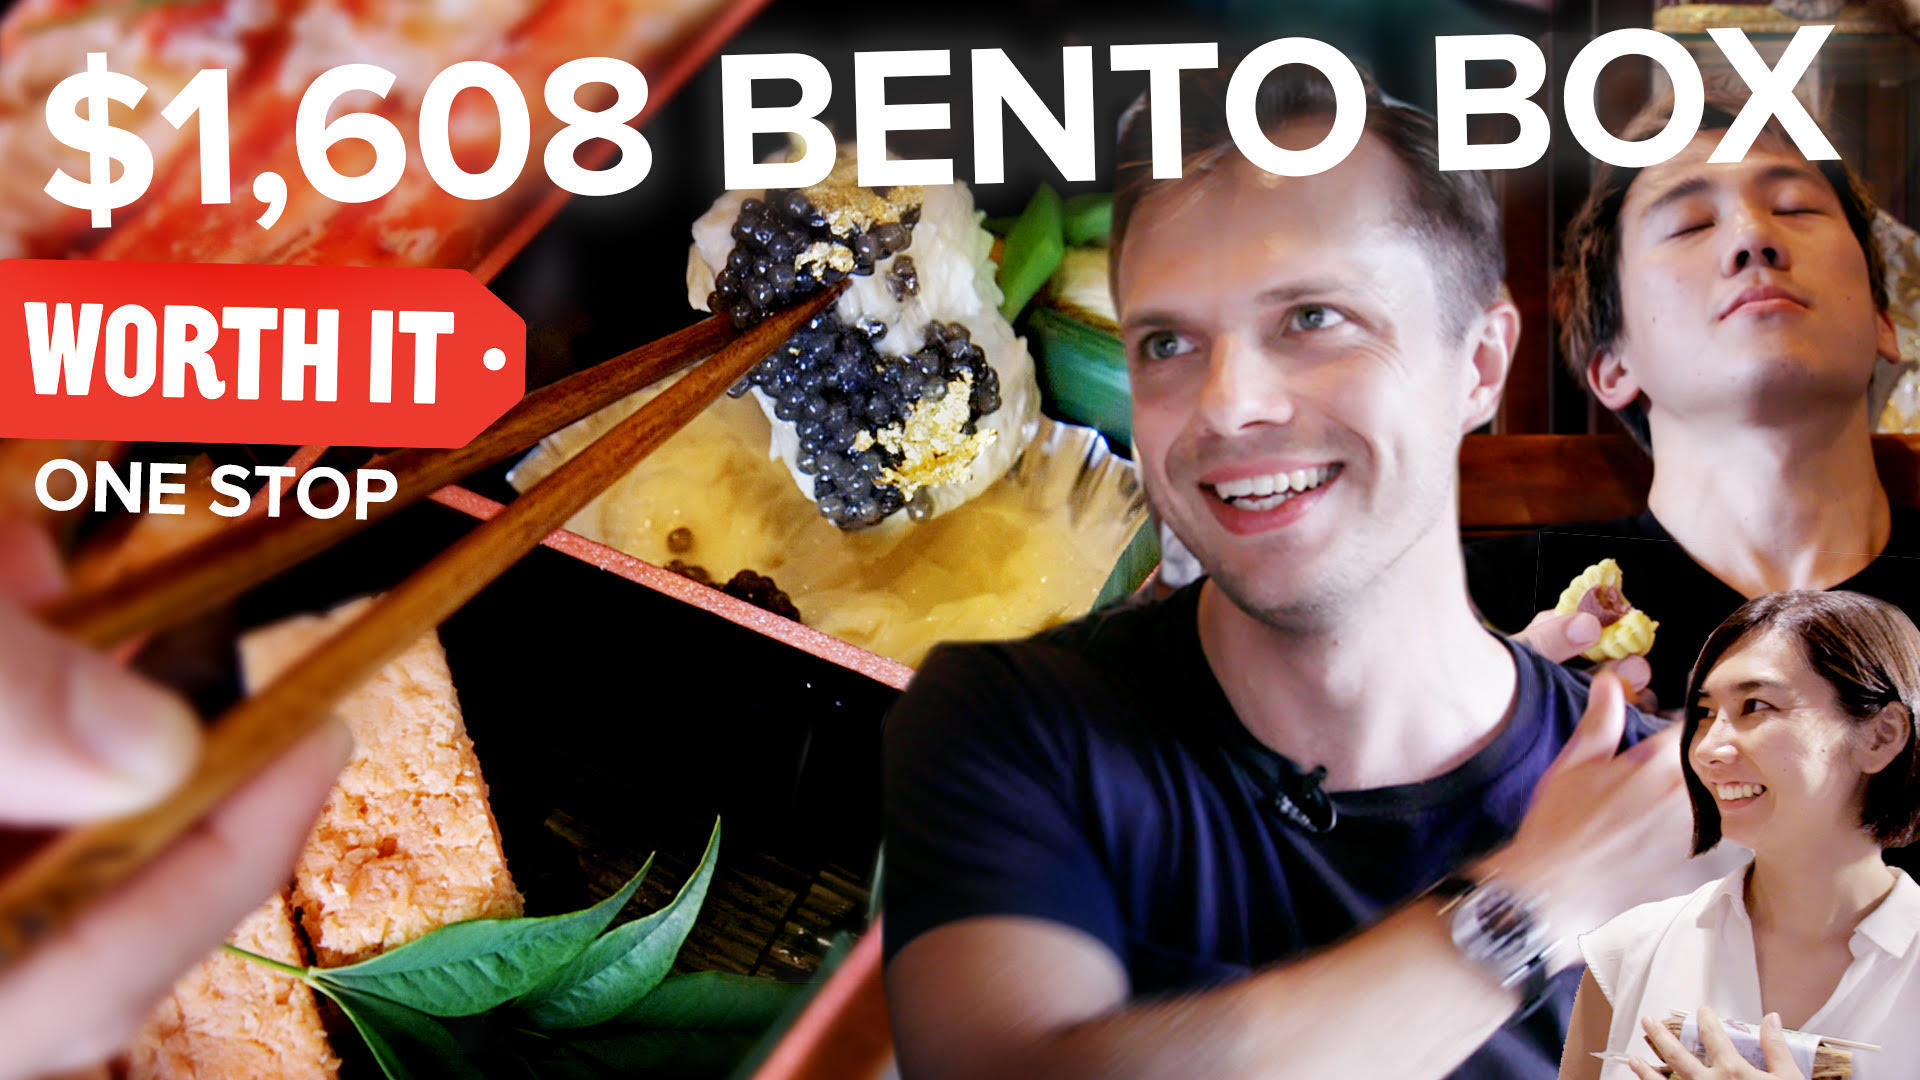 Japanese Survey Shows That 41.3% Of People Eat Homemade Bento